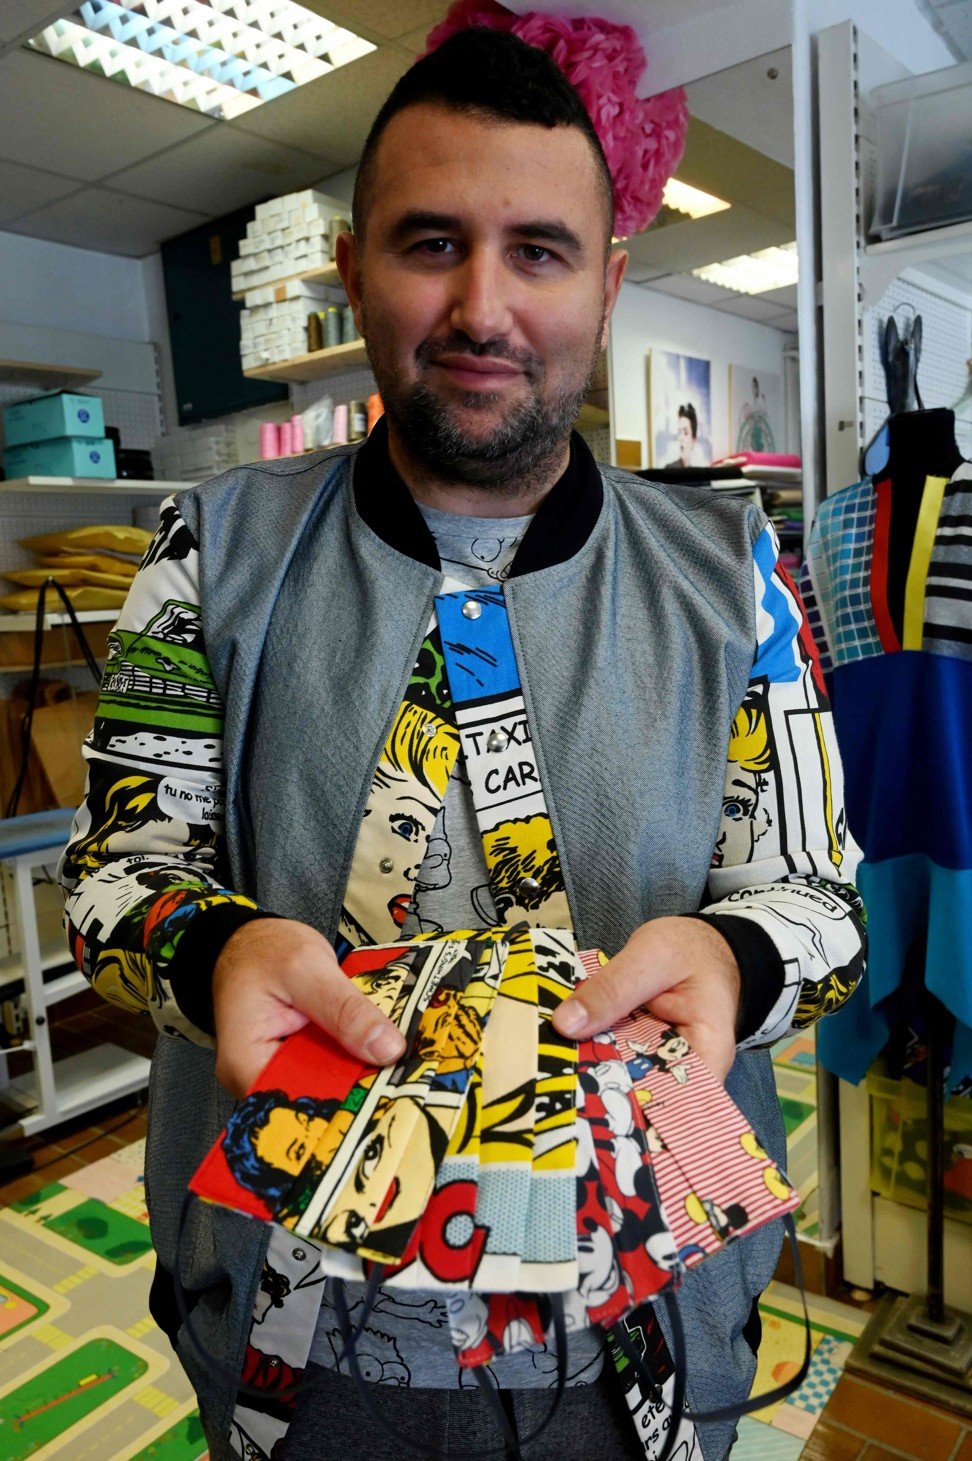 Croatian designer Aragovic shows a selection of face masks with his designs on them. Photo: AFP